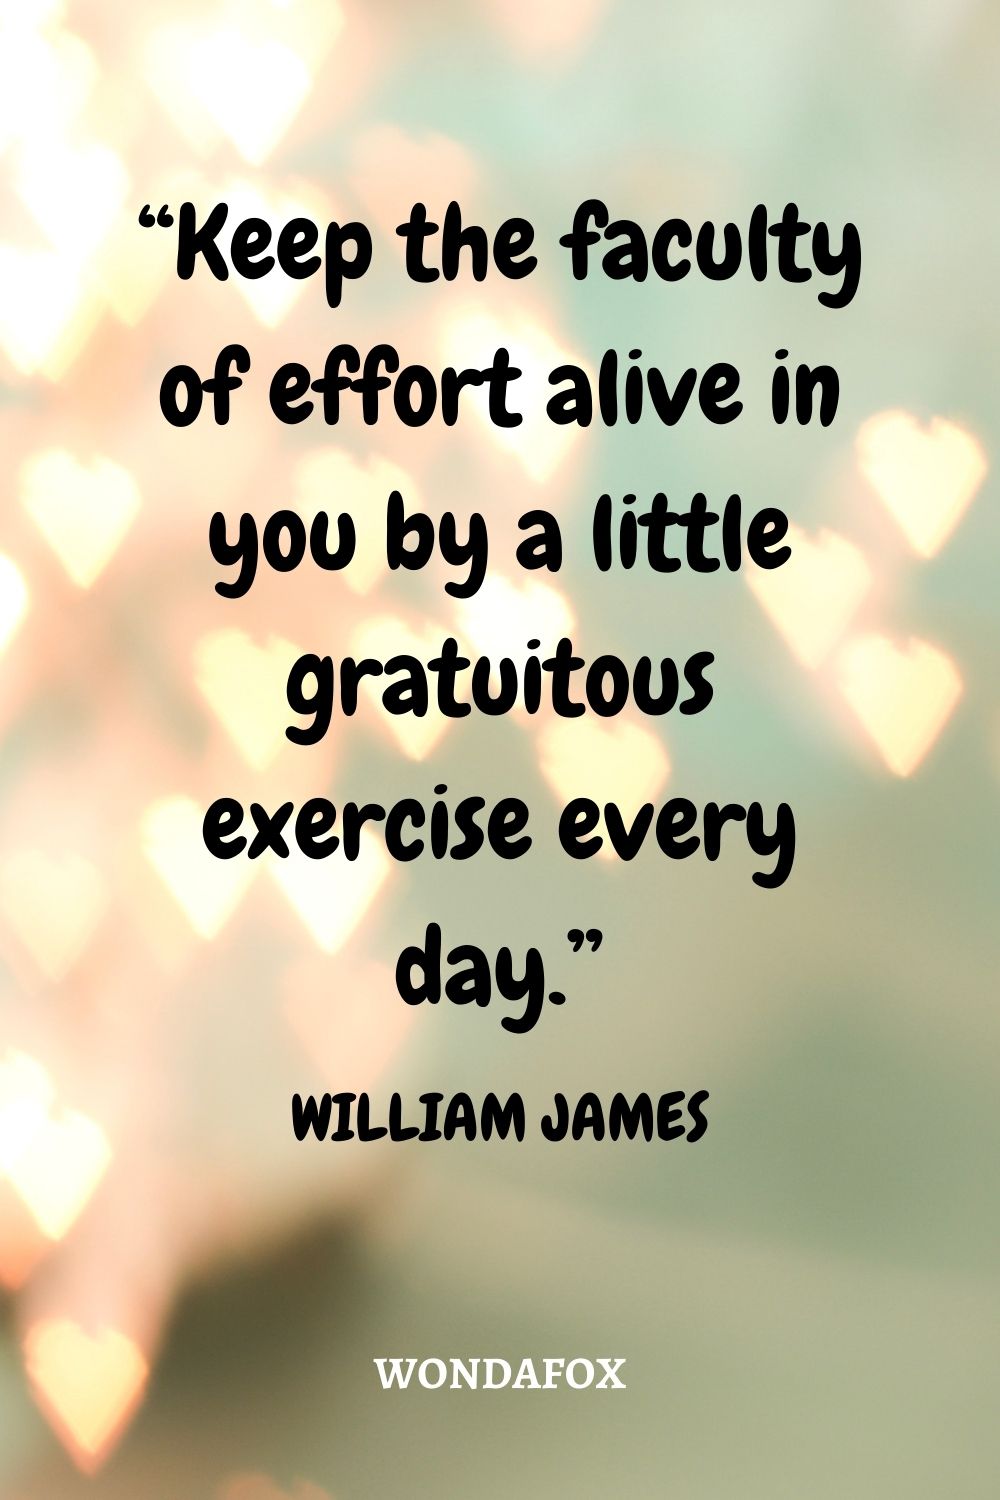 “Keep the faculty of effort alive in you by a little gratuitous exercise every day.”
William James